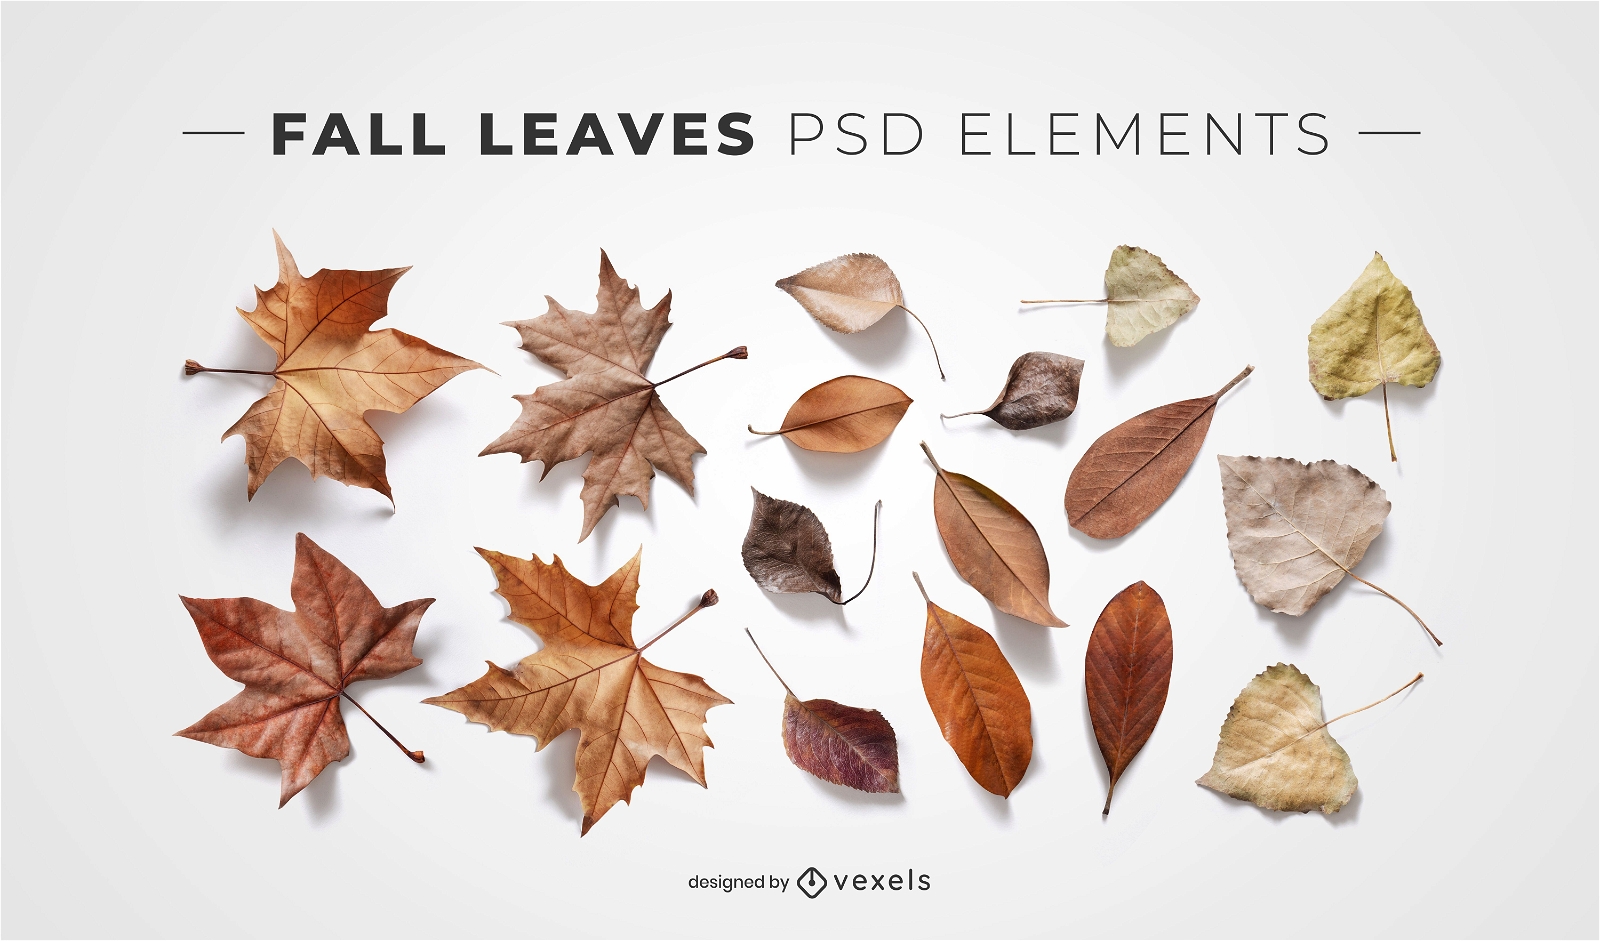 Fall leaves psd elements for mockups